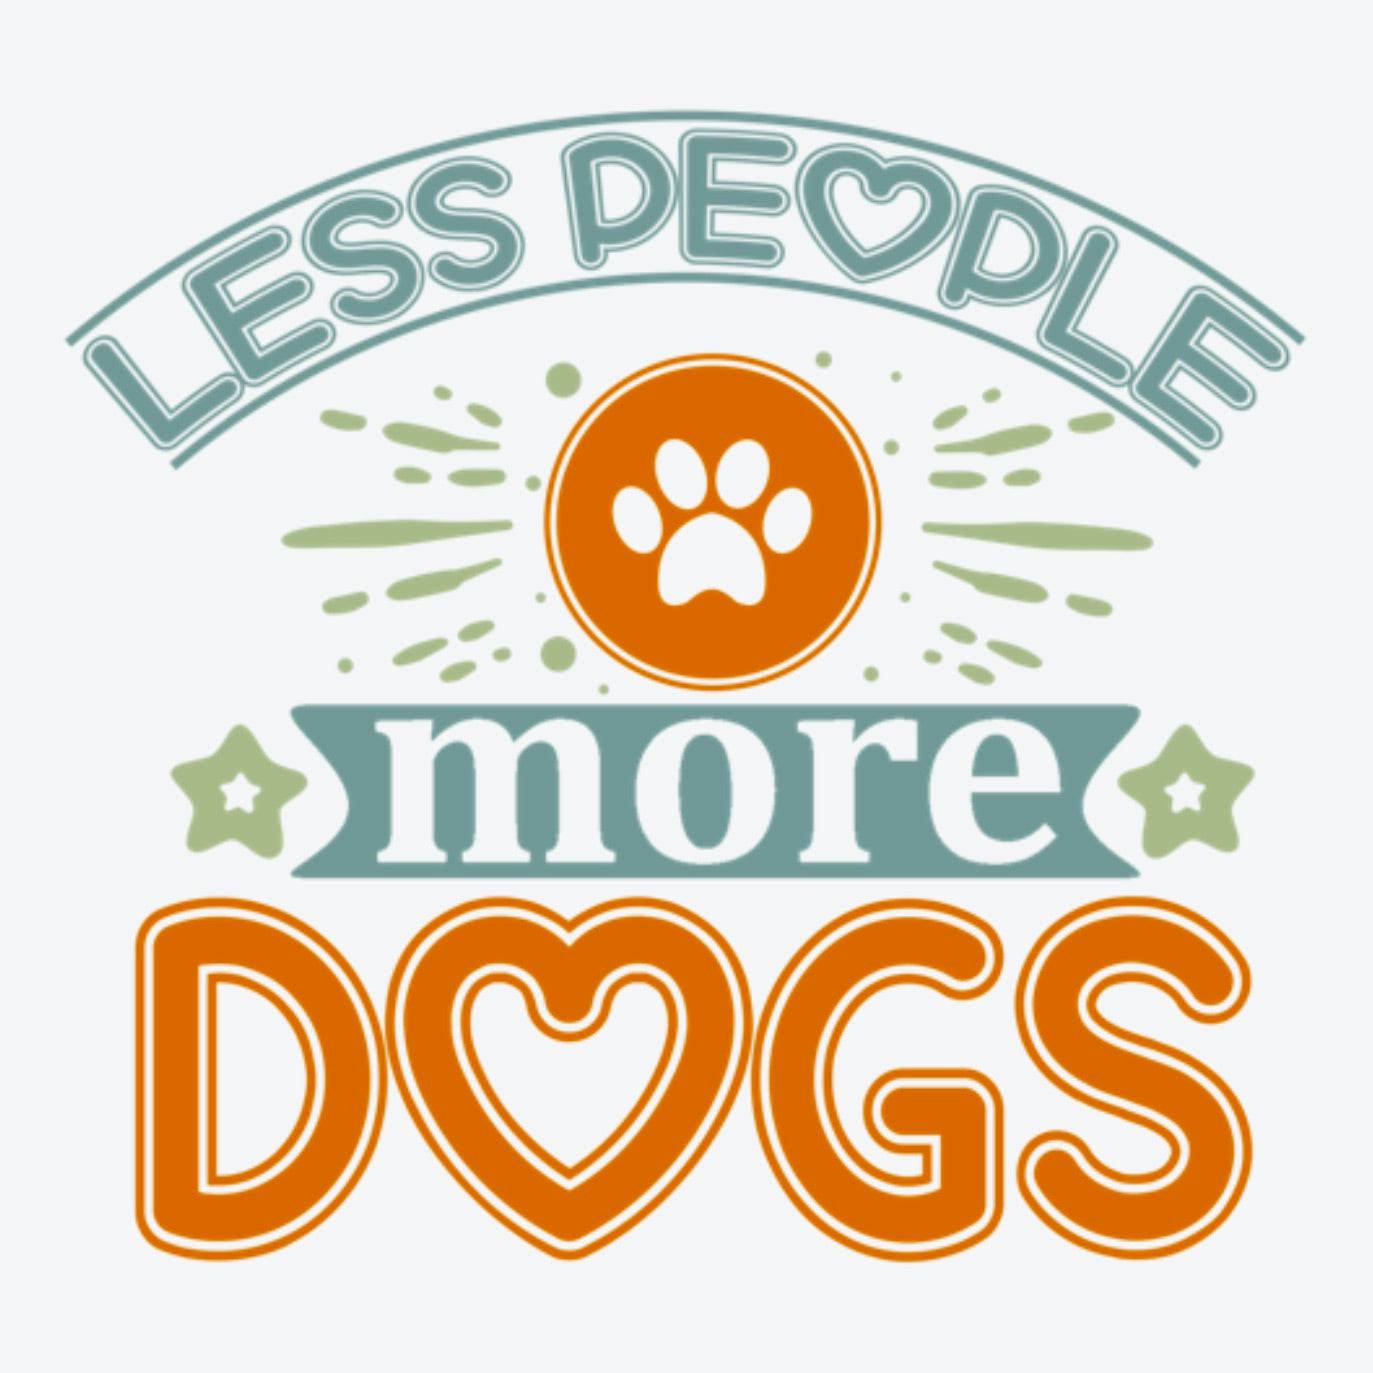 Less People, More Dogs Comic Collection Art Square Personalised Coaster Gift Idea